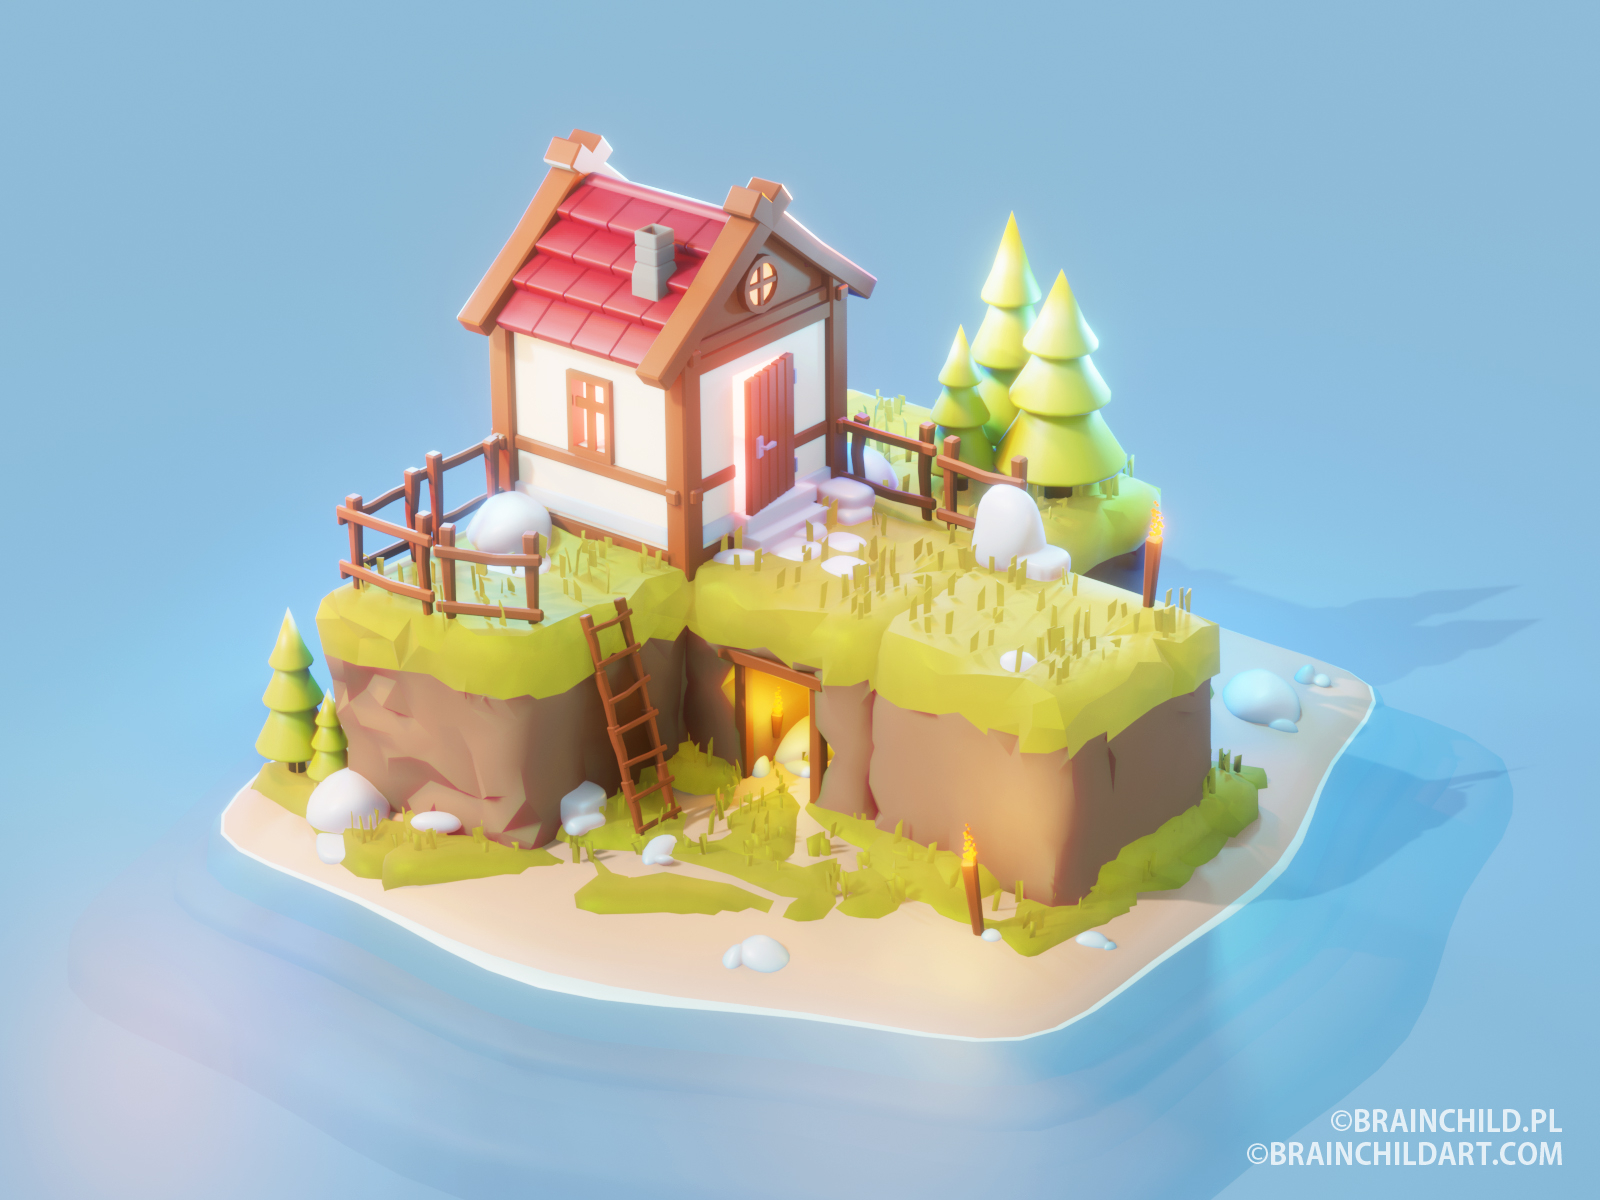 Cute Low Poly Hut on an Island - 3d Game Model Blender 2.90 3d artist 3d design 3d game asset 3d modeler 3d modeling environment design free freebie game art game artist game concept game ready house hut illustration indie low poly 3d lowpoly lowpoly3d lowpolyart